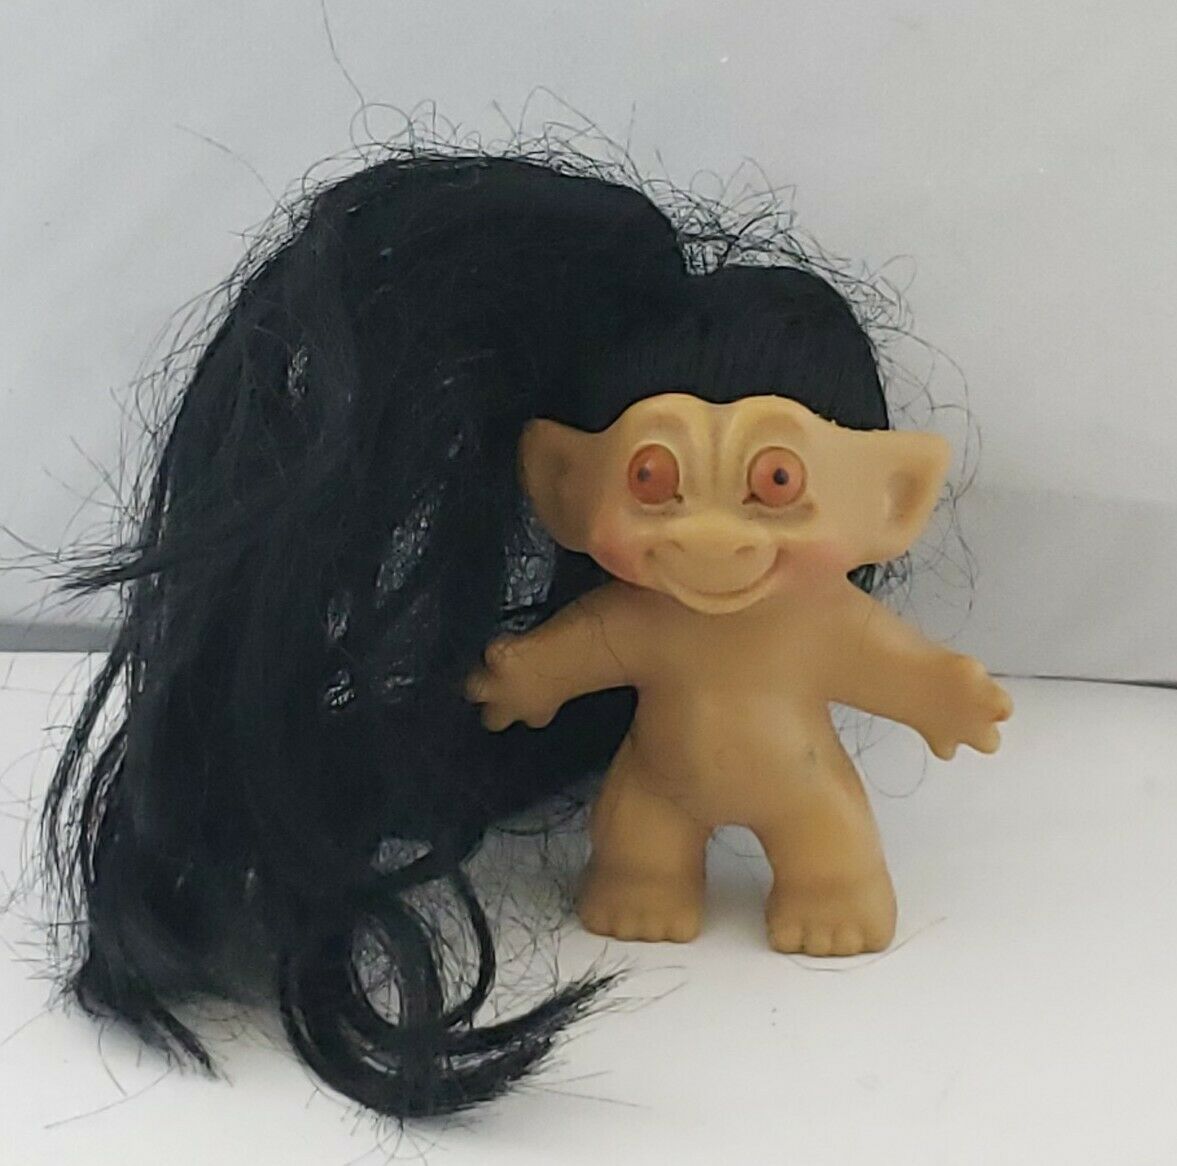 Rare Vintage 3" Rootie - Rooted Hair Tab Neck Troll Doll - Black Hair - 1960's